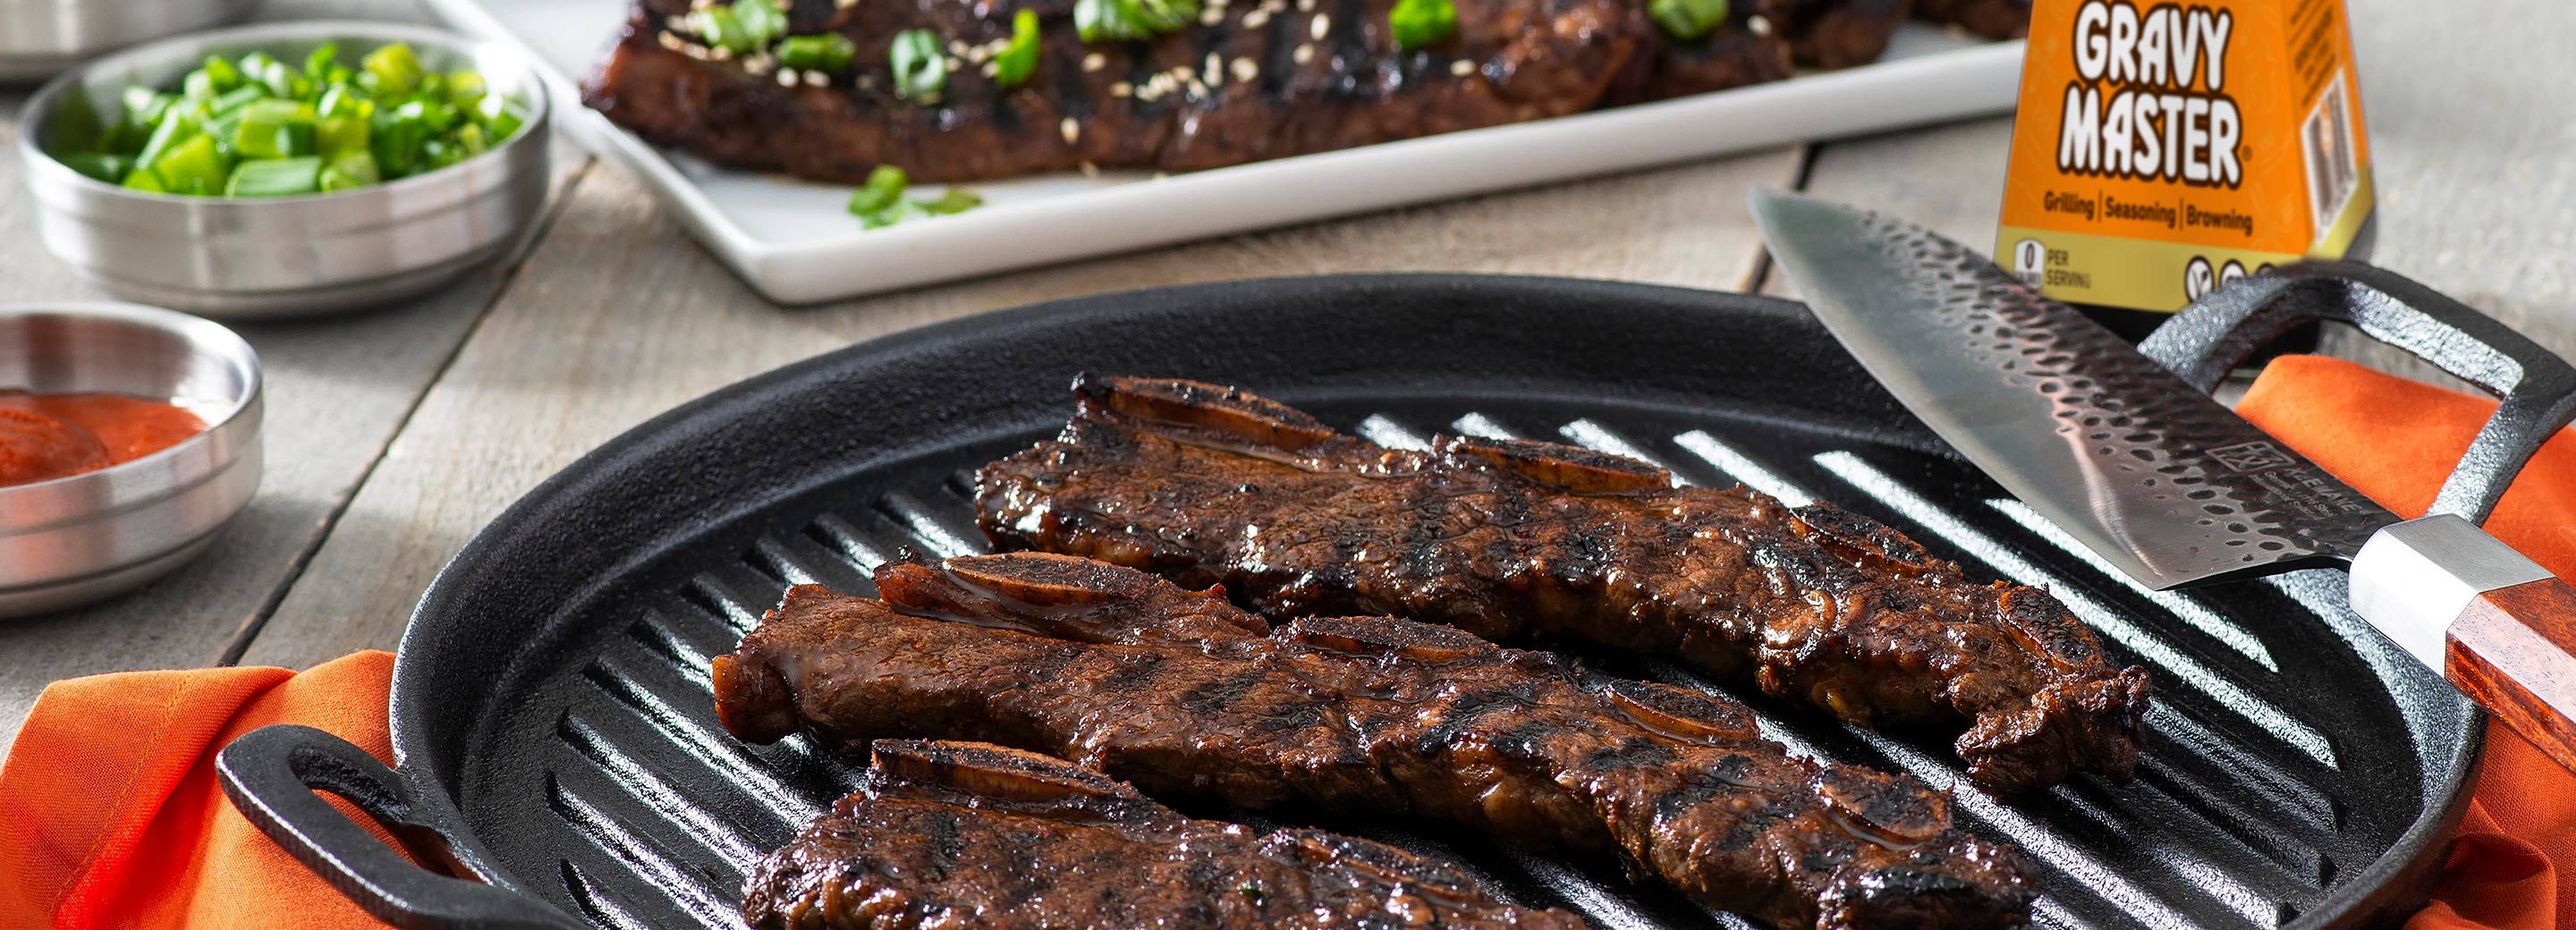 Grilled Korean Barbecue Beef Ribs